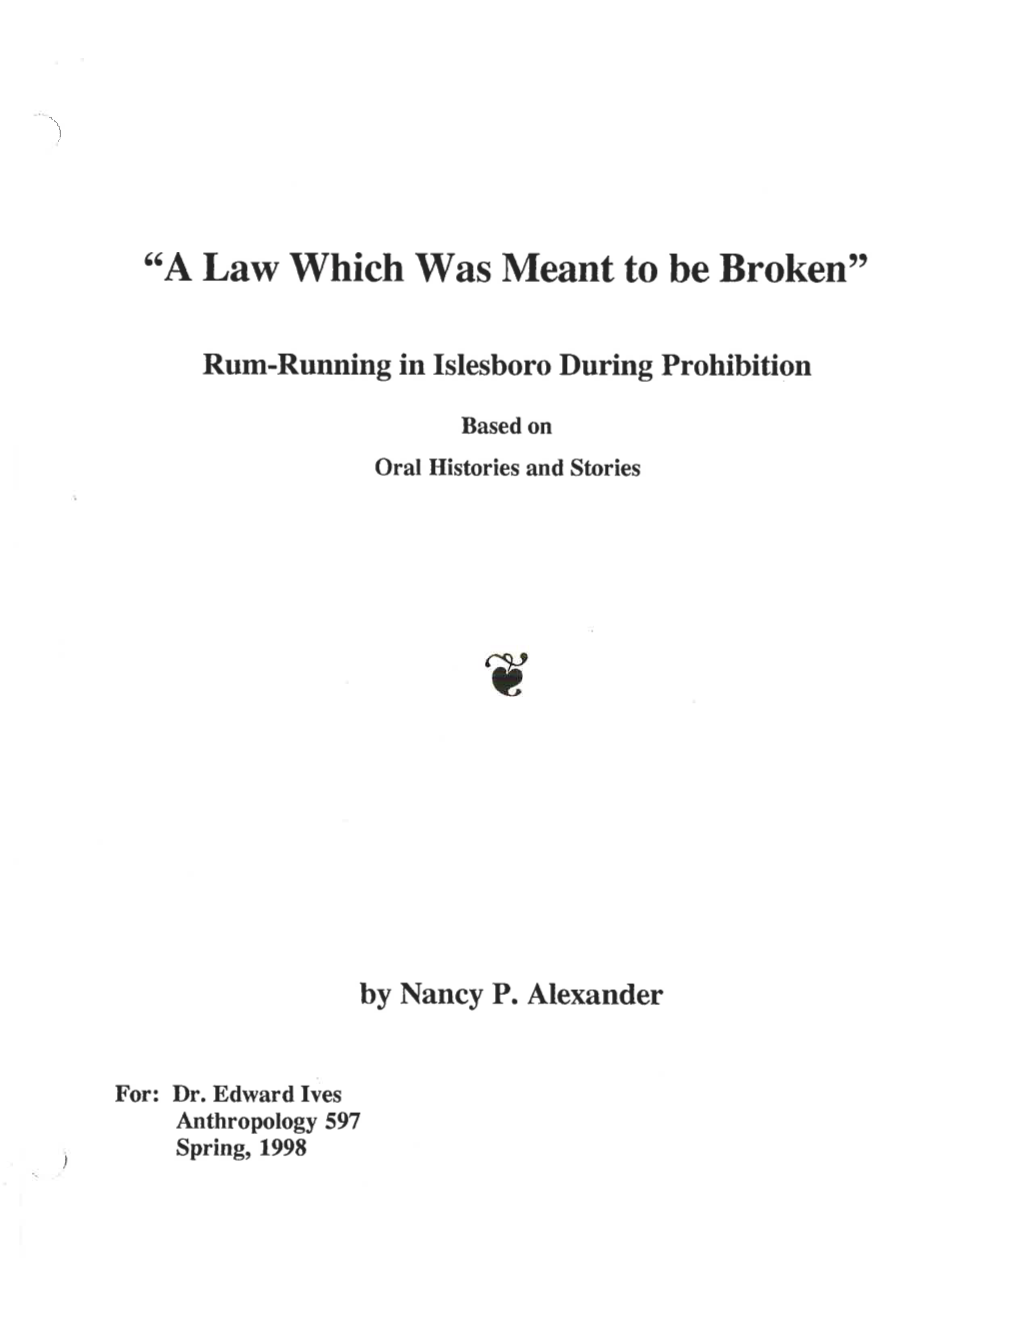 "A Law Which Was Meant to Be Broken"